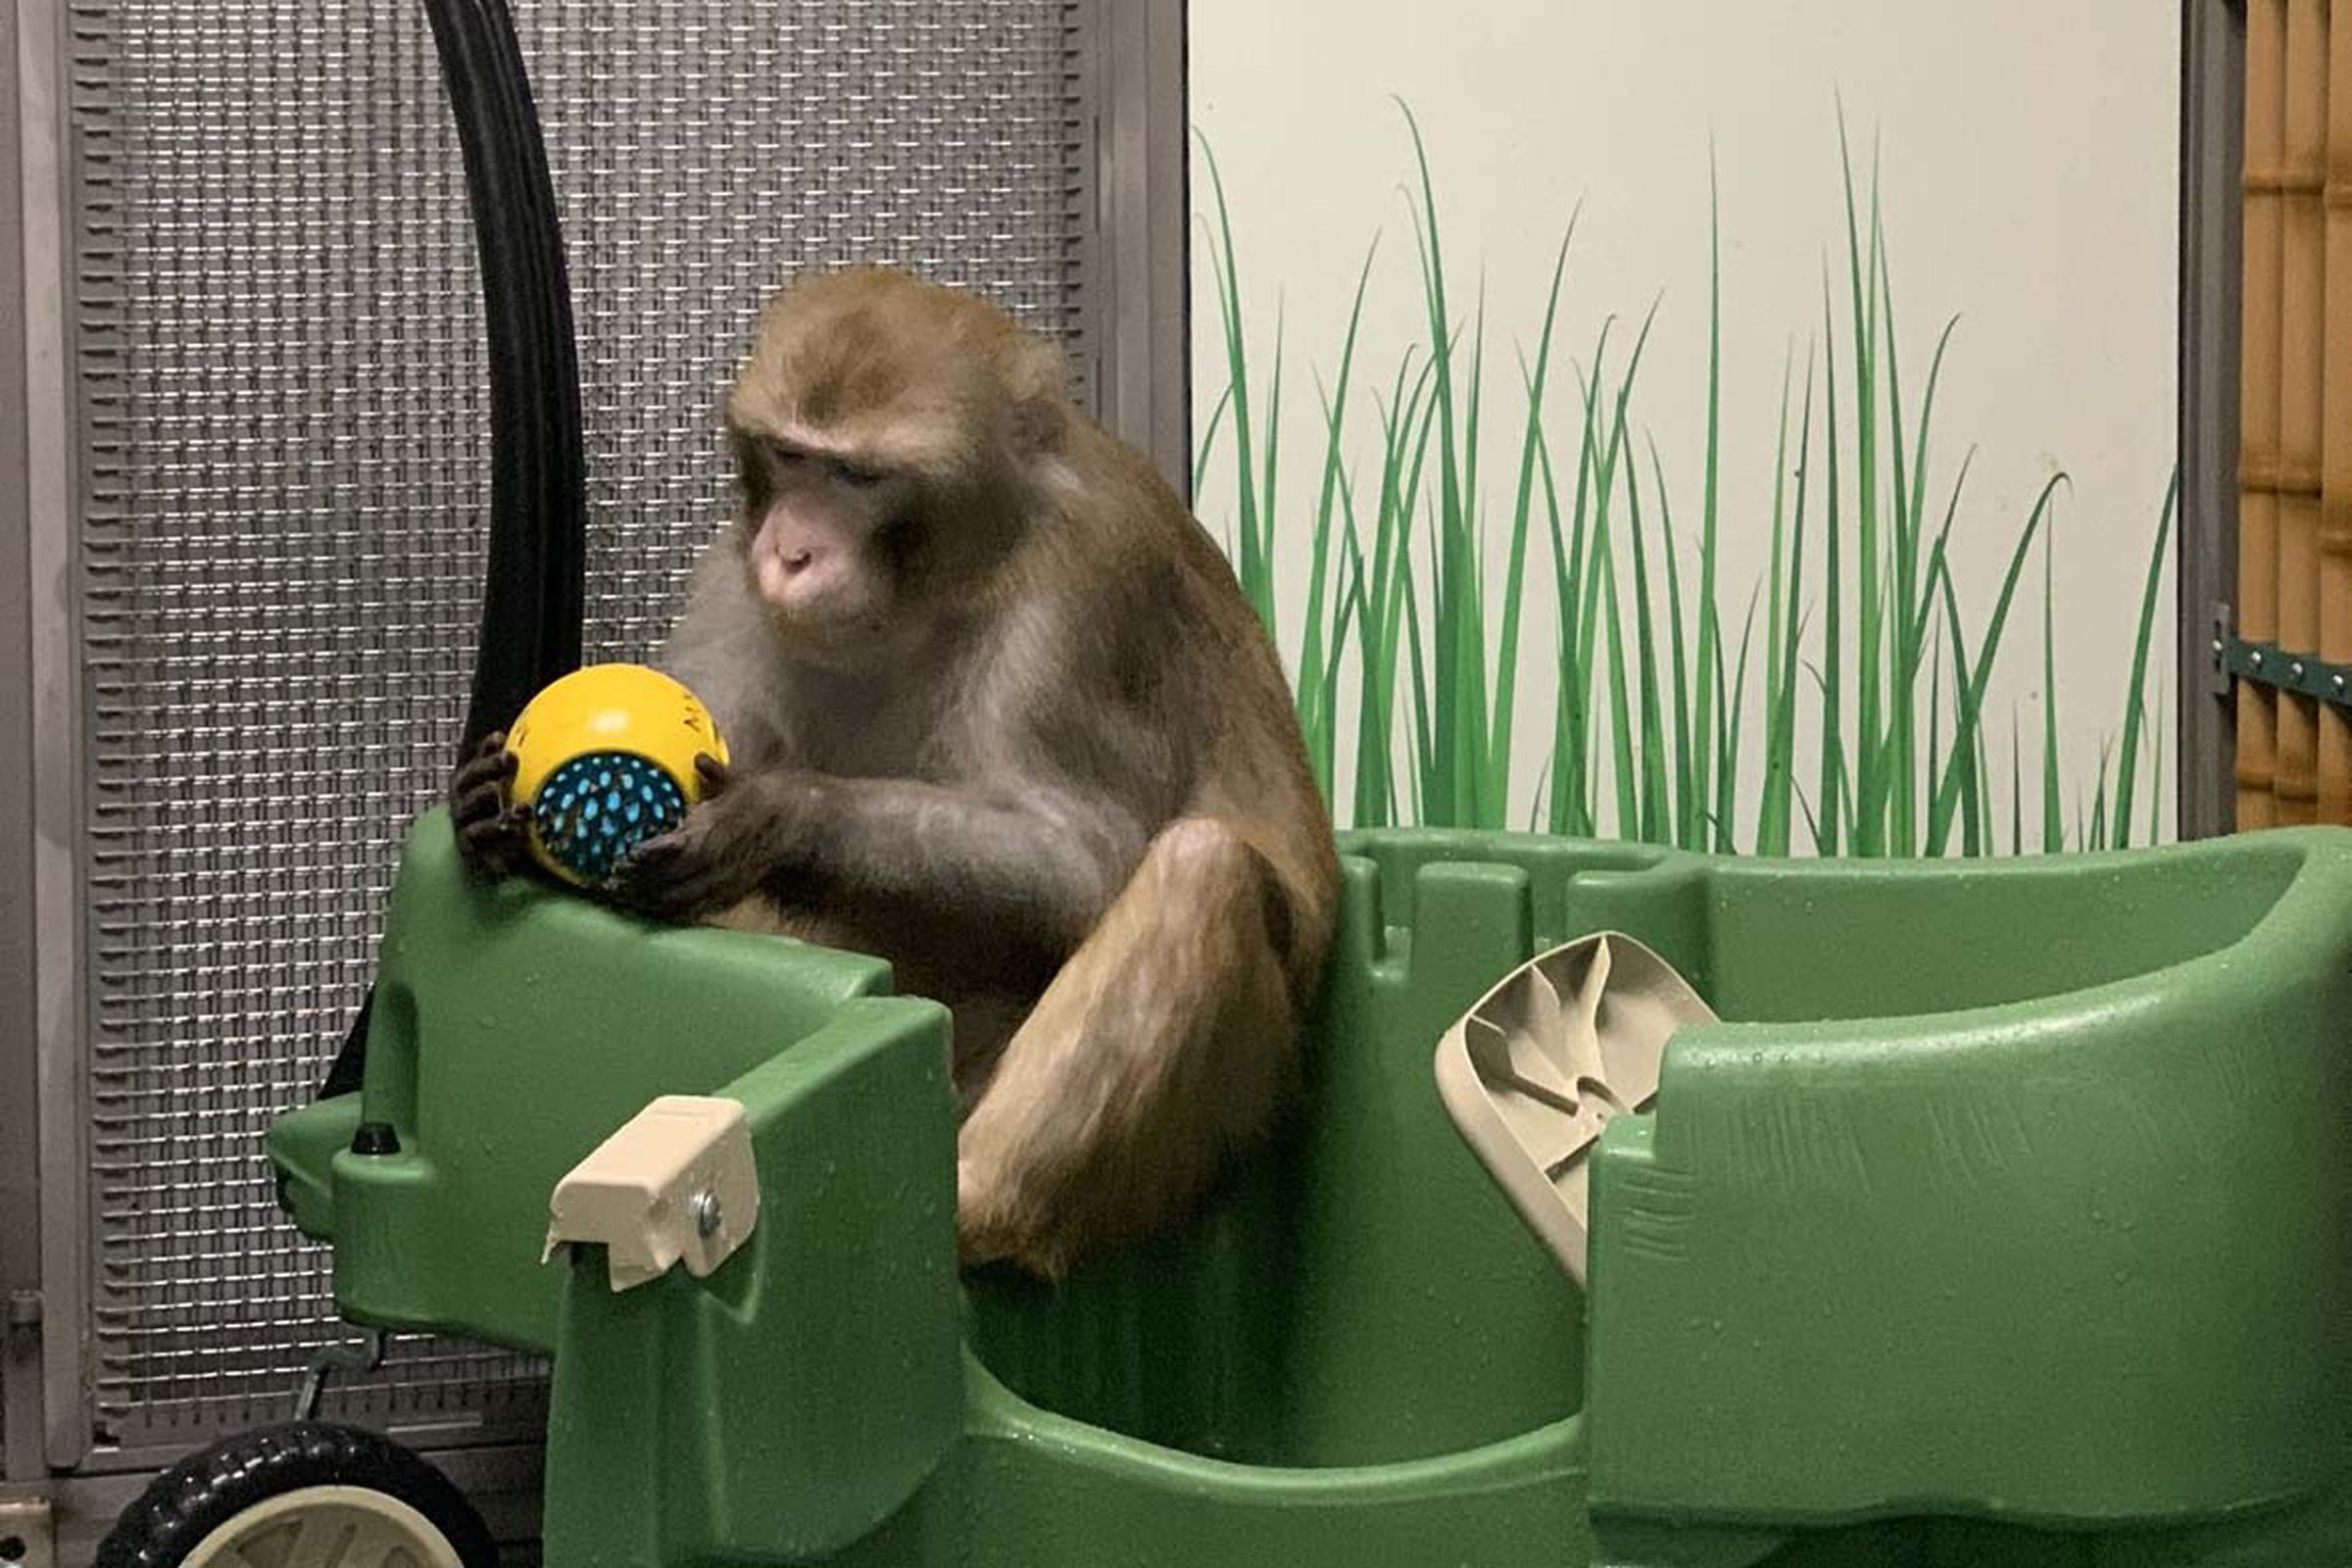 Monkey holding ball while sitting in wagon.